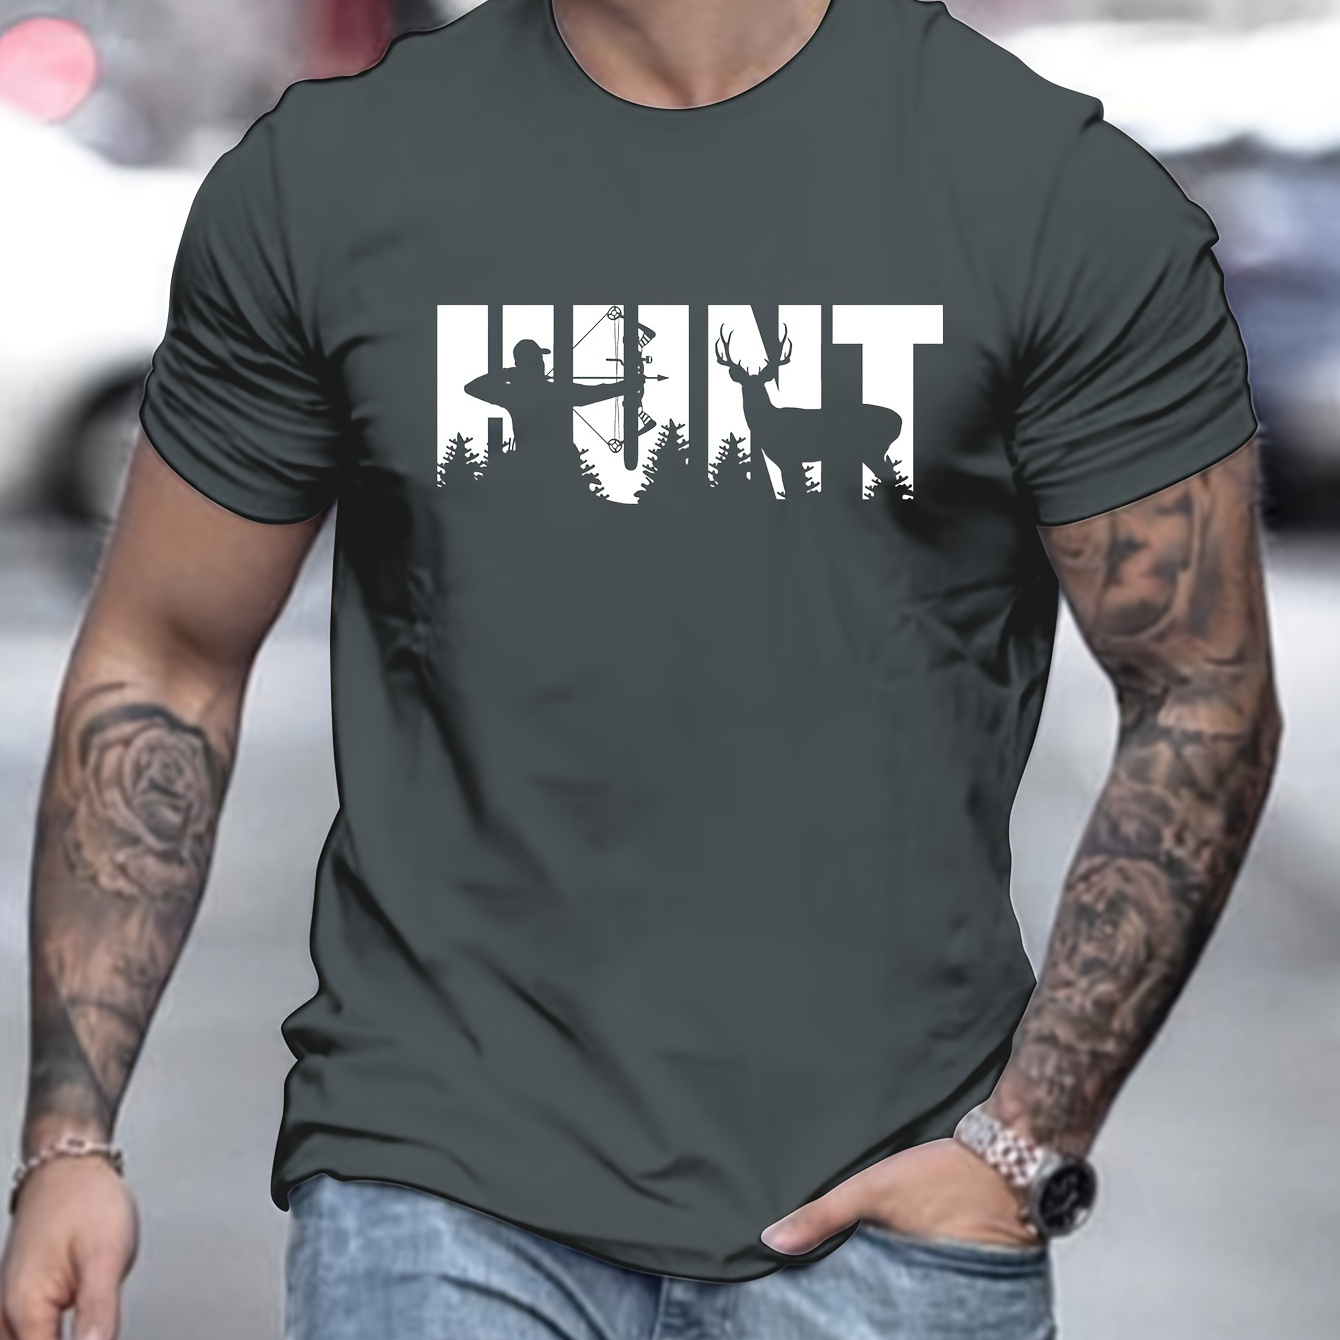 

Hunting Print, Men's Round Crew Neck Short Sleeve, Simple Style Tee Fashion Regular Fit T-shirt, Casual Comfy Breathable Top For Spring Summer Holiday Leisure Vacation Men's Clothing As Gift